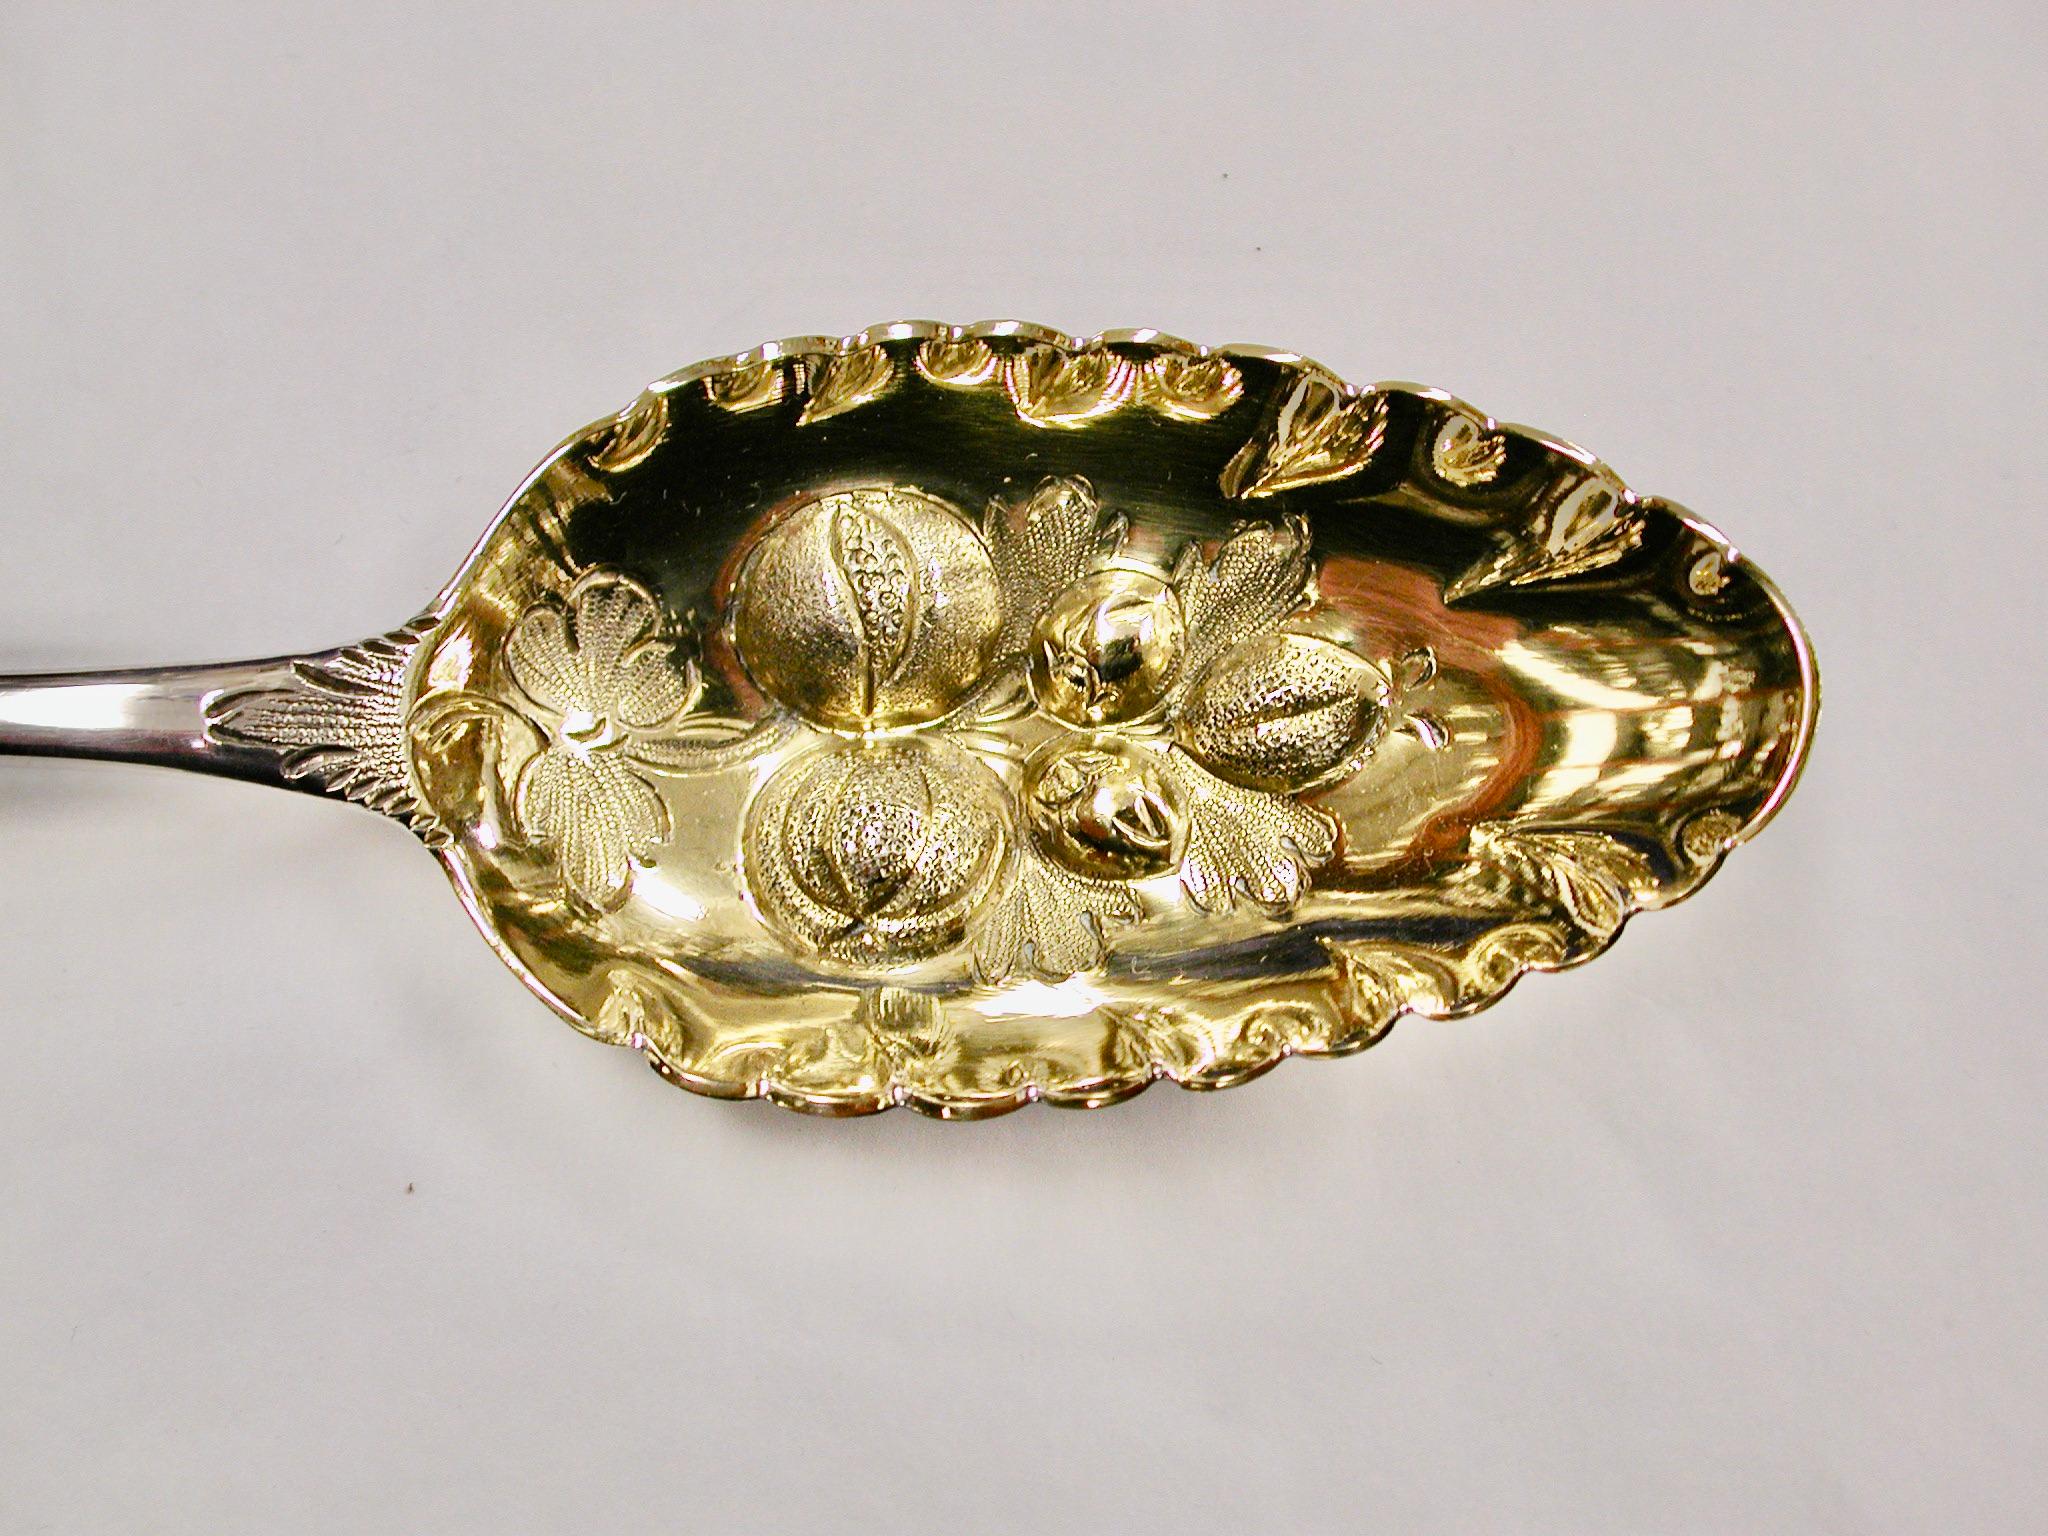 Early 19th Century Pair of George 111 Silver Berry Spoons with Matching Sugar Sifter, 1799-1805